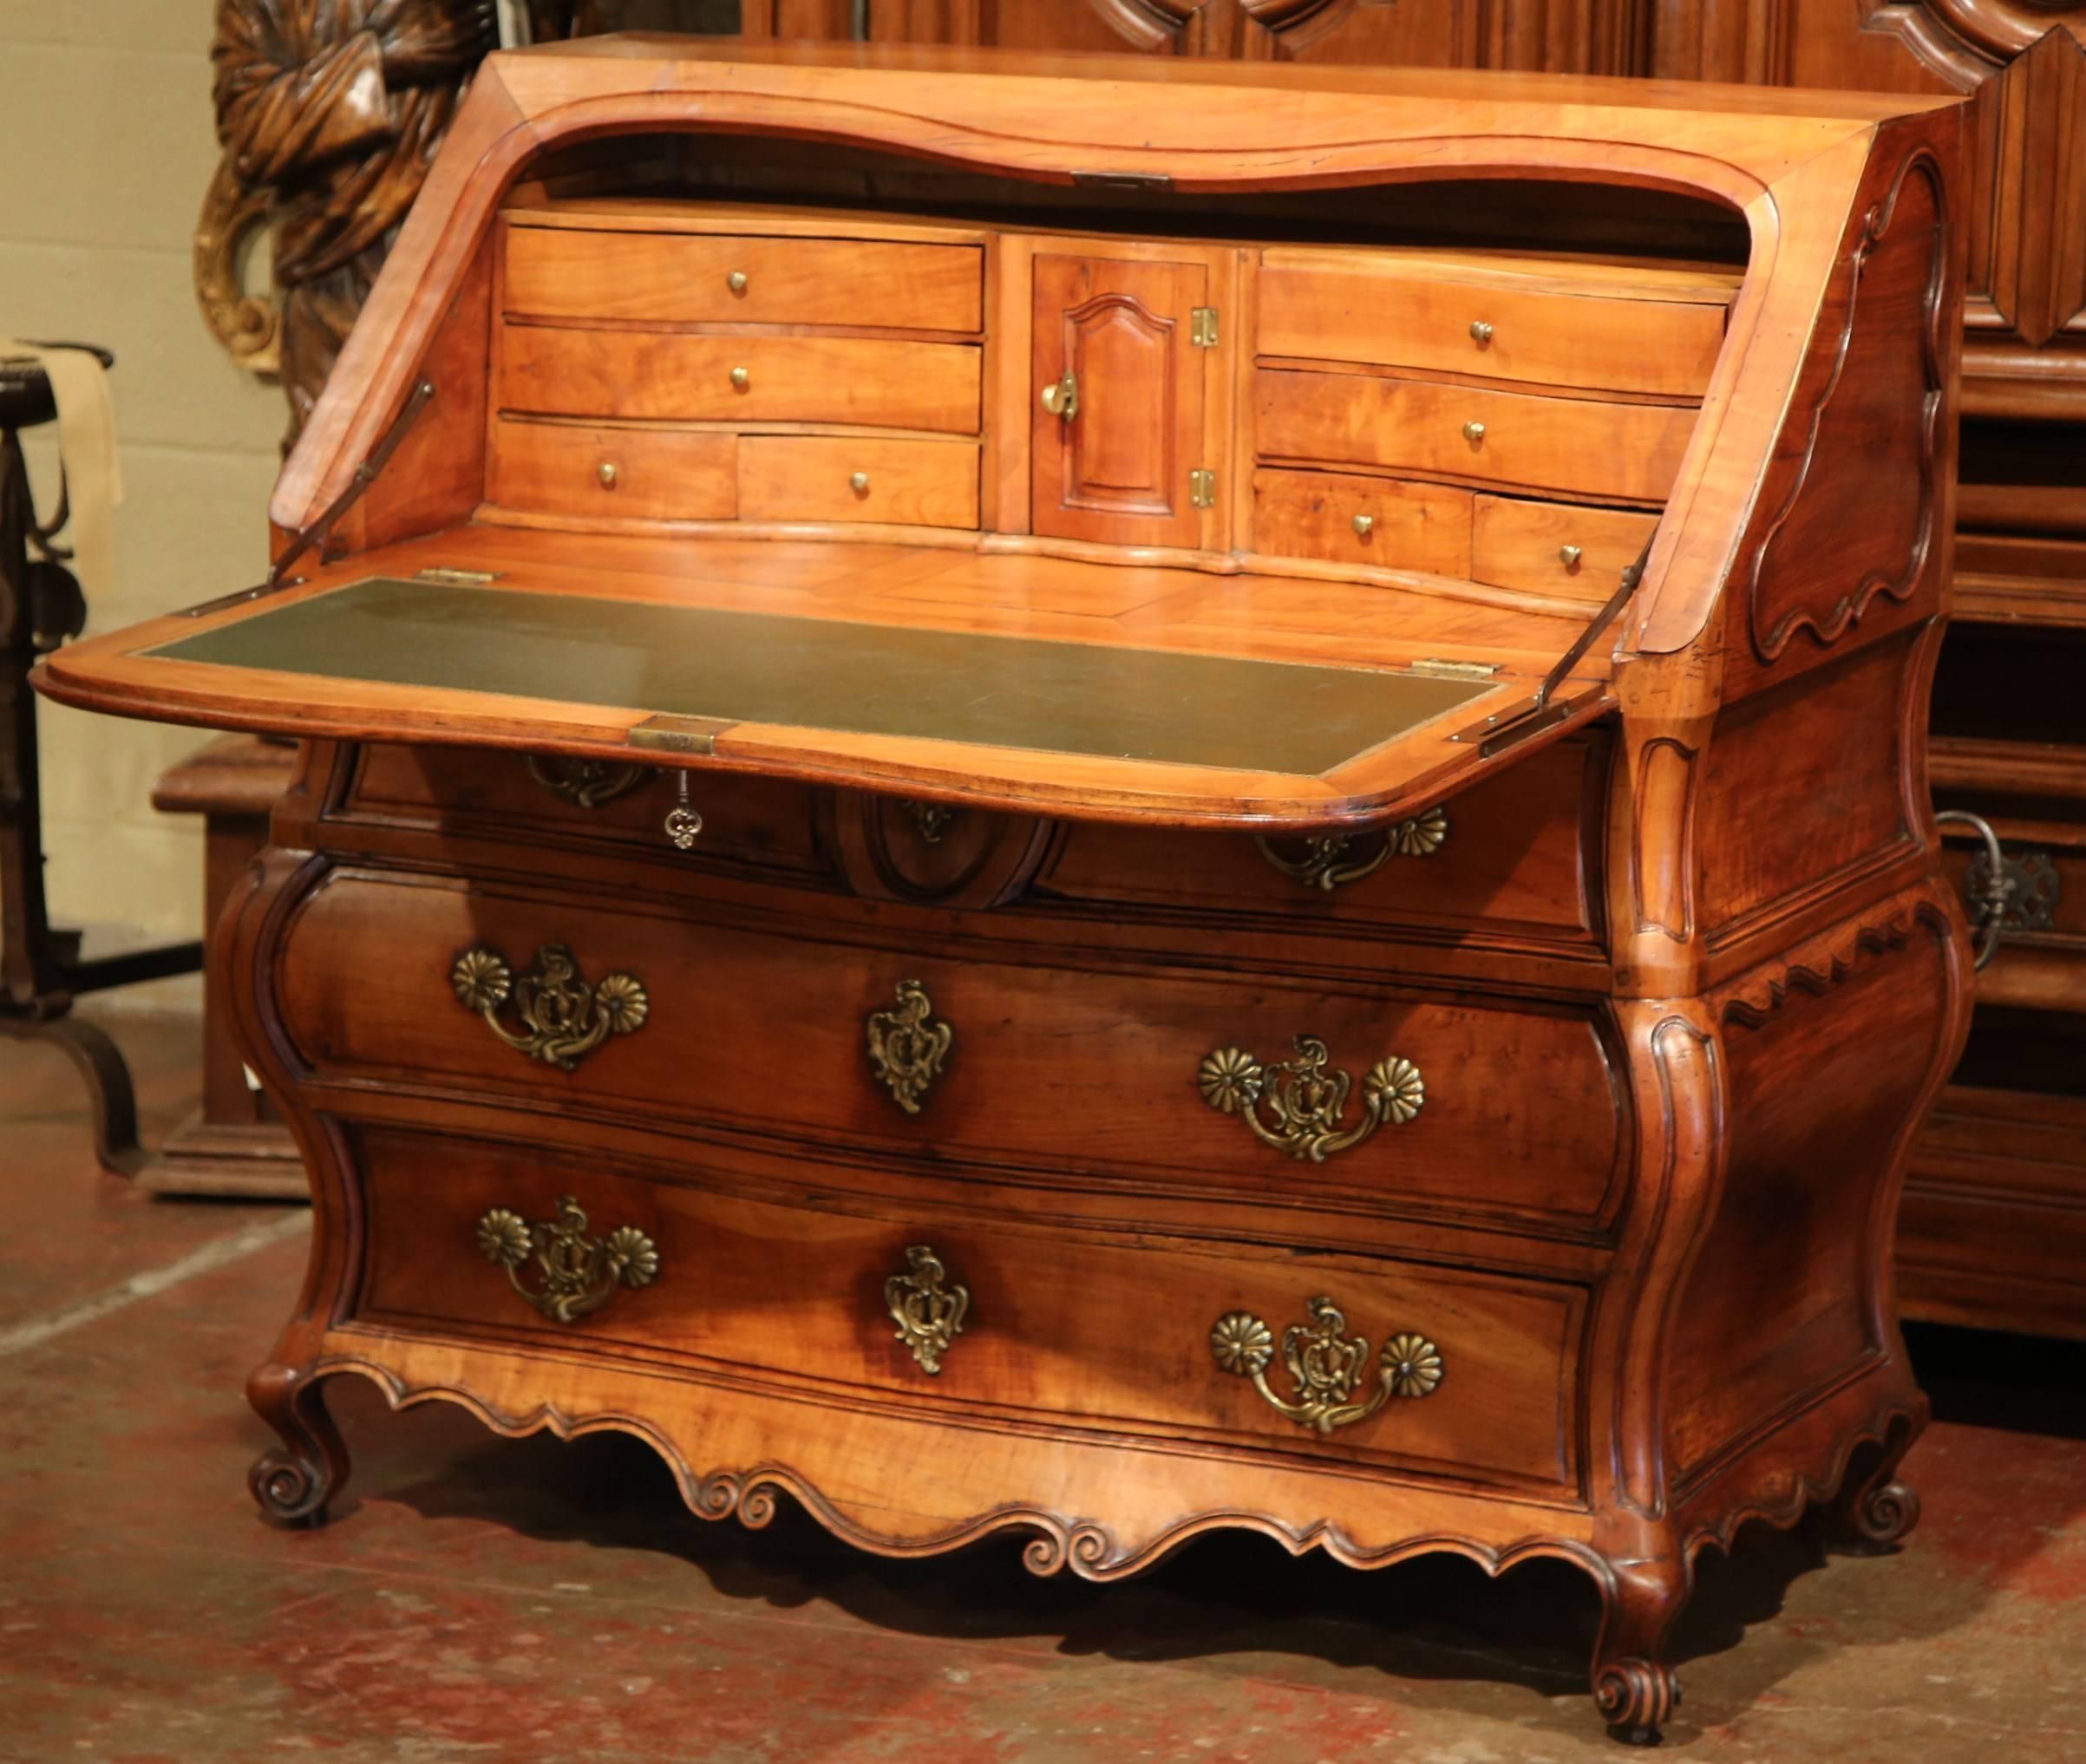 Hand-Carved 18th Century French Louis XV Bombe Cherry Desk Secretary Scriban from Bordeaux